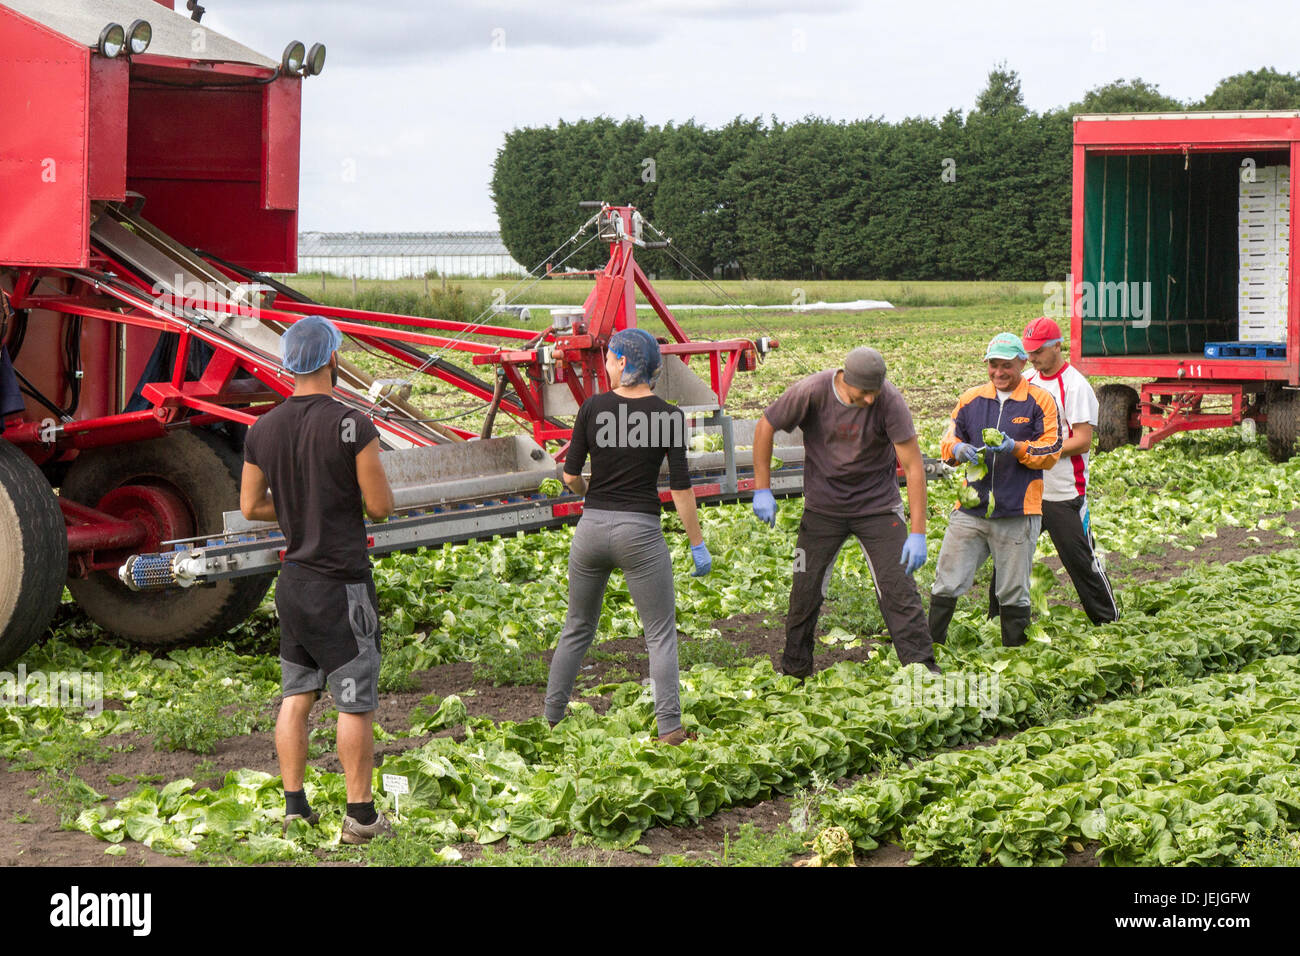 Tarleton, Lancashire, UK. 26th Jun, 2017. EU Nationals face uncertain future as they harvest lettuce.  The farms & farmers consistently rely on a large number of immigrant, migrant works and Eu citizens to assist in the labour intensive planting, weeding and harvesting of salad crops, and whose employment remains in some doubt as negotiations start over Brexit.  Britain's food production depends on seasonal migrant labour from the EU. Credit; MediaWorldImages/AlamyLiveNews Stock Photo